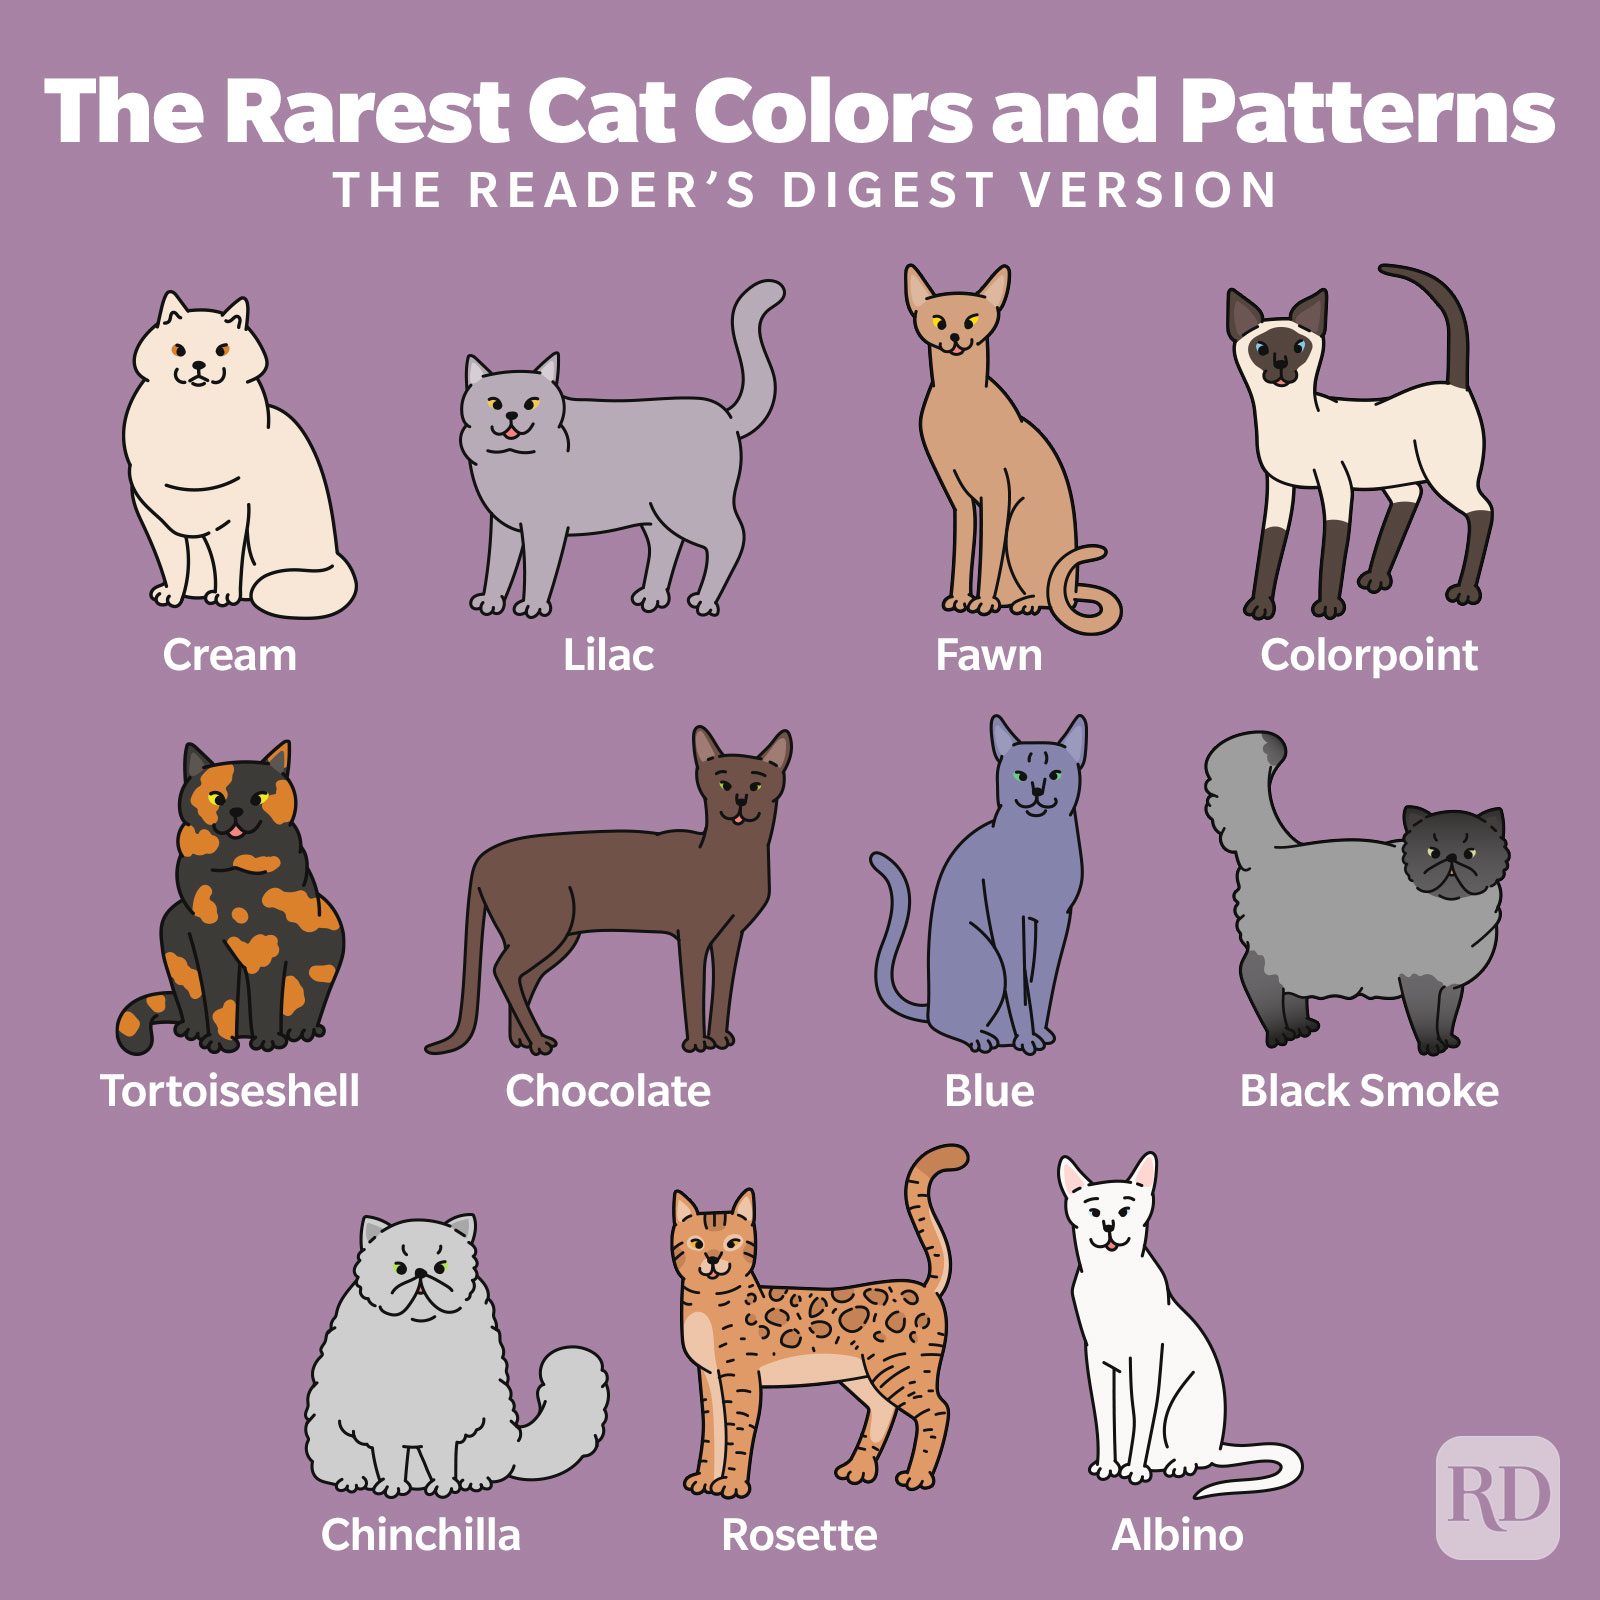 Cat Fur Patterns - How Many Have You Seen Before?